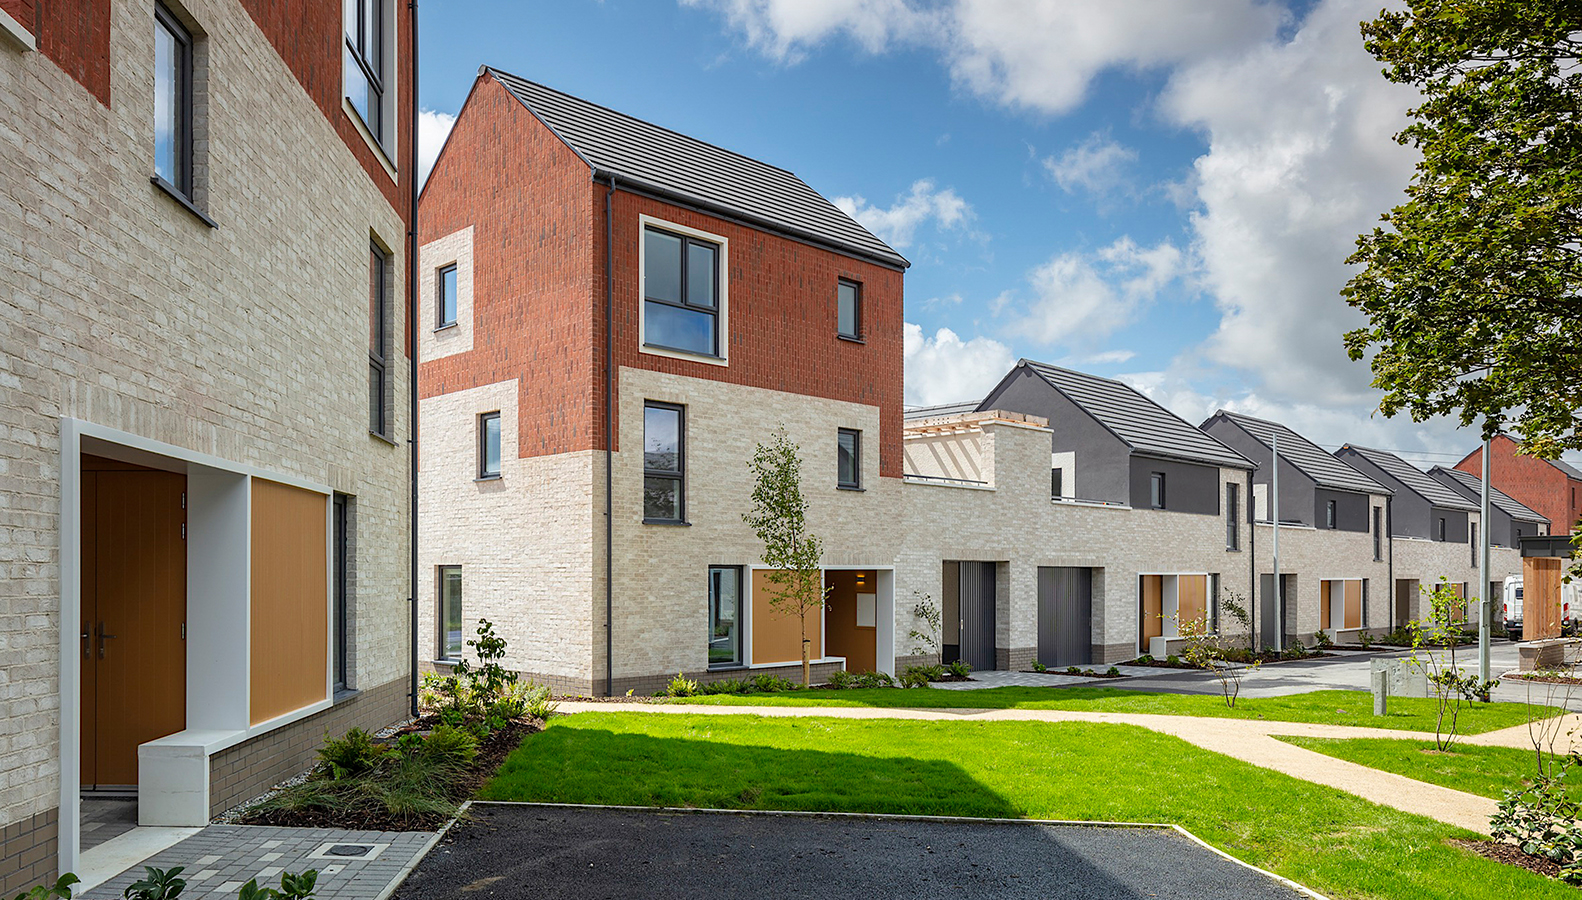 Wilkinsons Brook Shortlisted for RIAI Award 